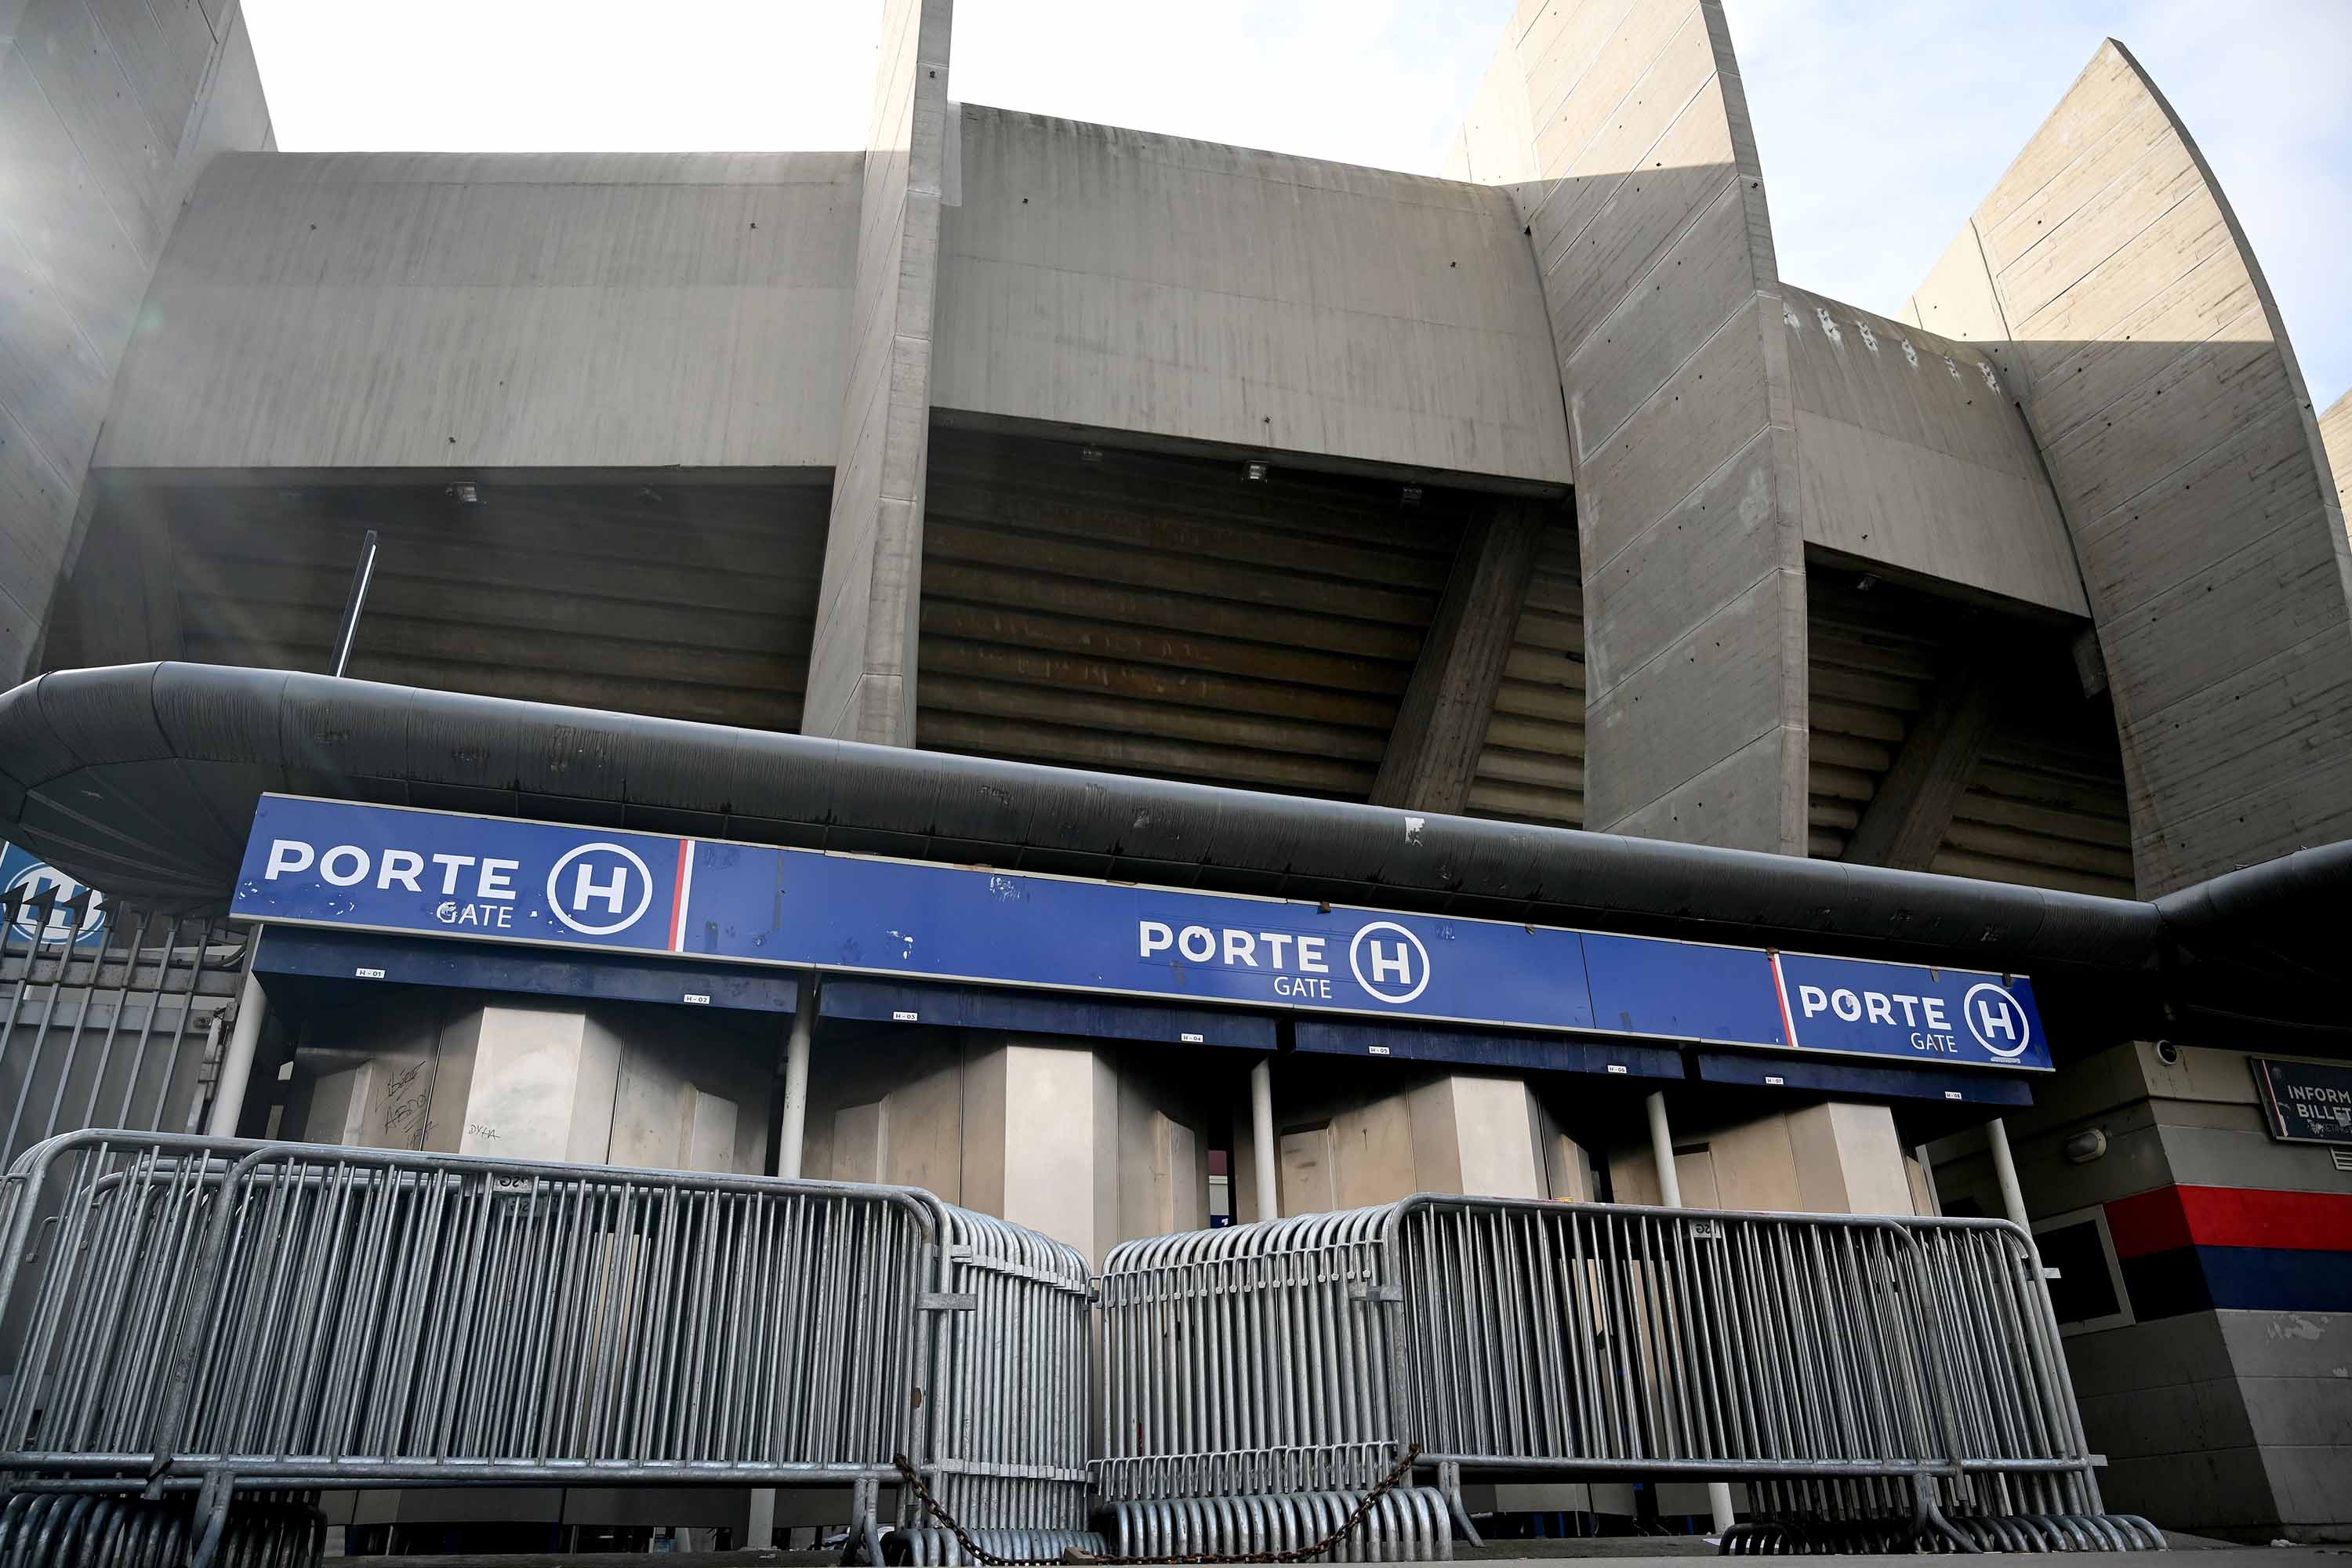 A gate of the Parc des Princes stadium in Paris is pictured on Monday, ahead of UEFA Champions League Group A match between Paris Saint-Germain and Dortmund scheduled for Wednesday.